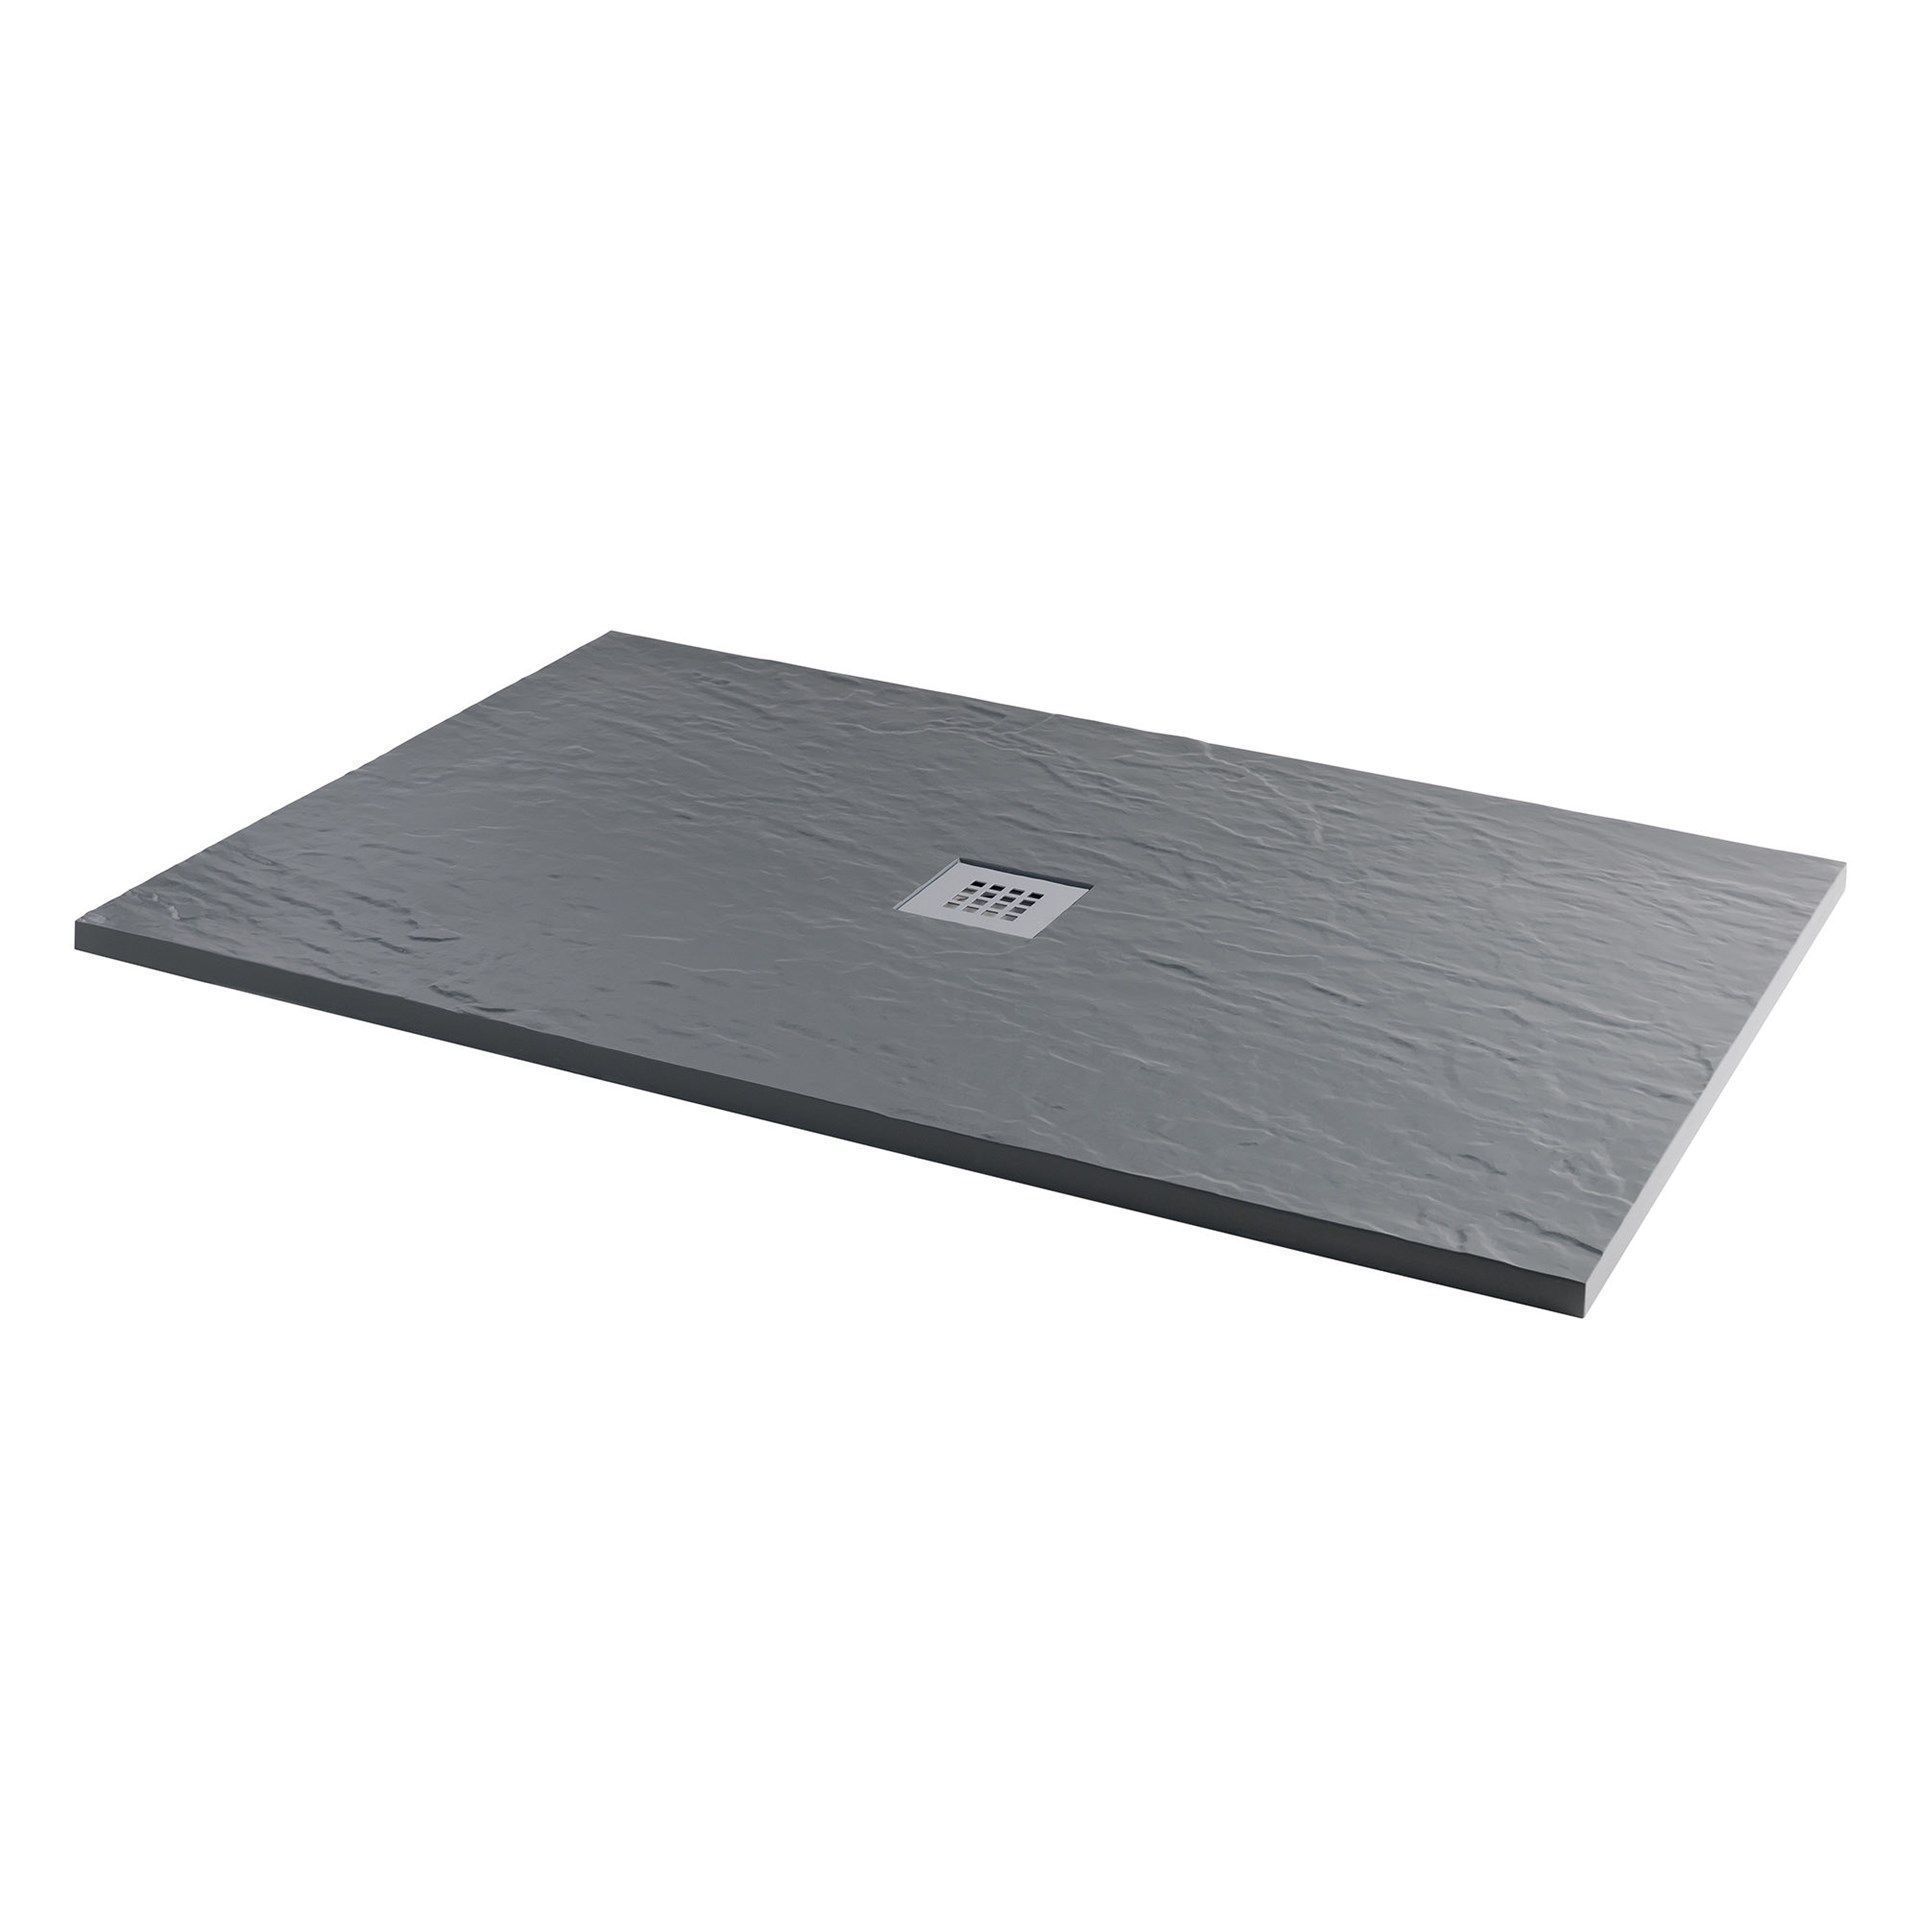 NEW (C199) 1200x900mm Rectangular Slate Effect Shower Tray in Grey. Manufactured in the UK fro... - Image 2 of 3